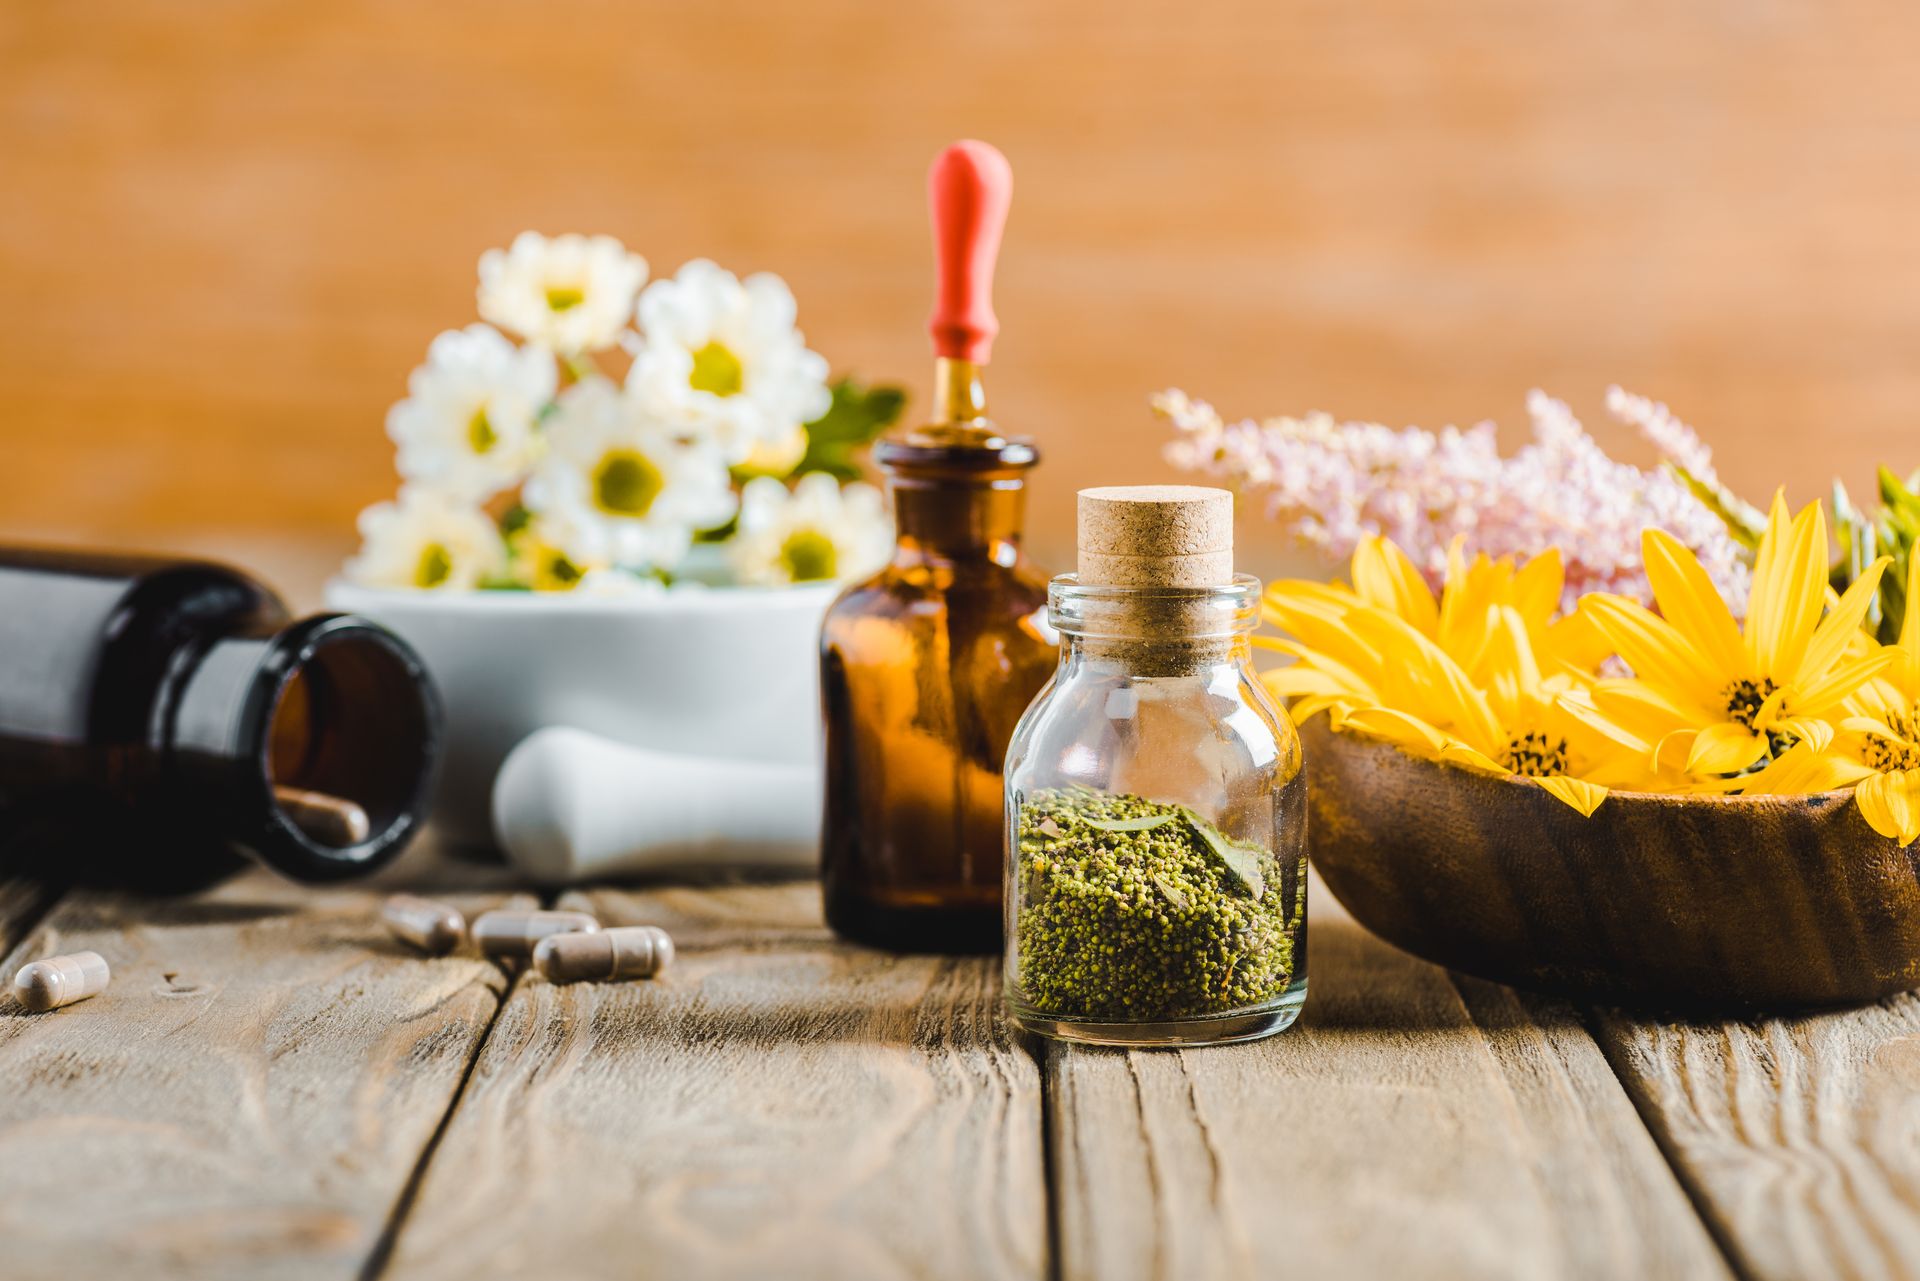 Spices in bottles, bowls of flowers on a wooden table.Alternative Health Options.